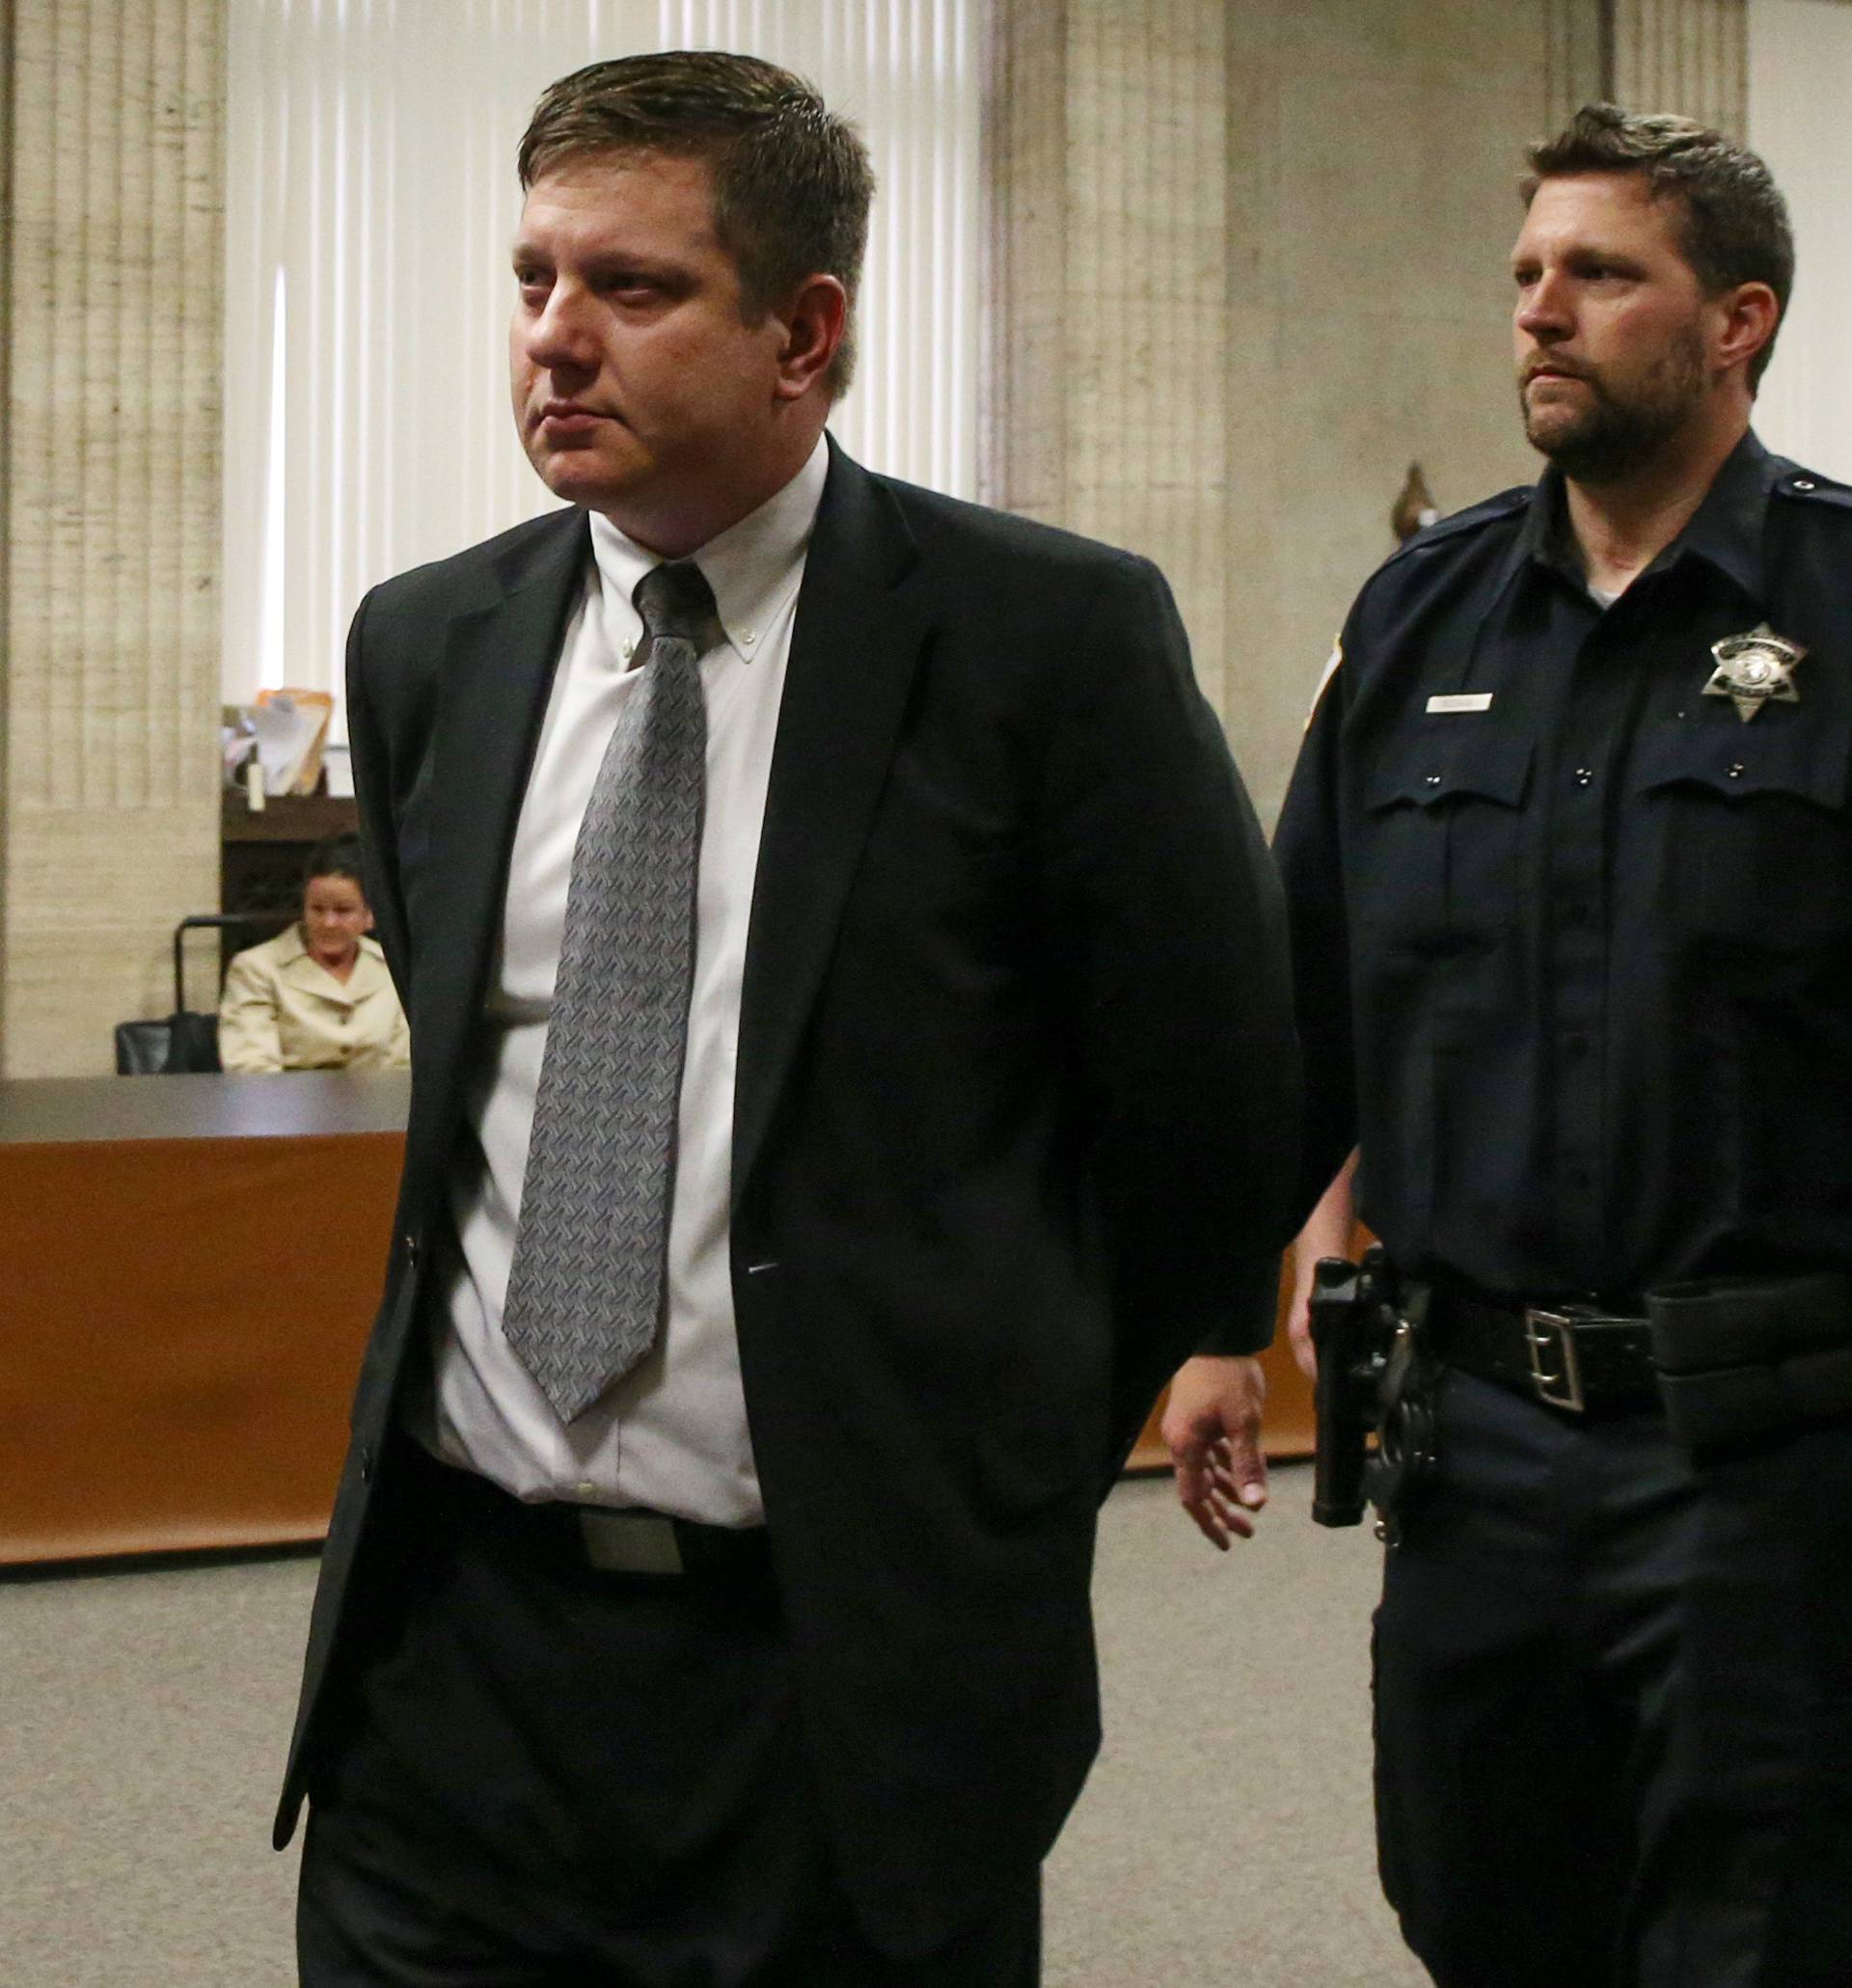 Chicago police Officer Jason Van Dyke is lead away in handcuffs after his guilty verdict in his murder trial in the shooting death of Laquan McDonald, in Chicago